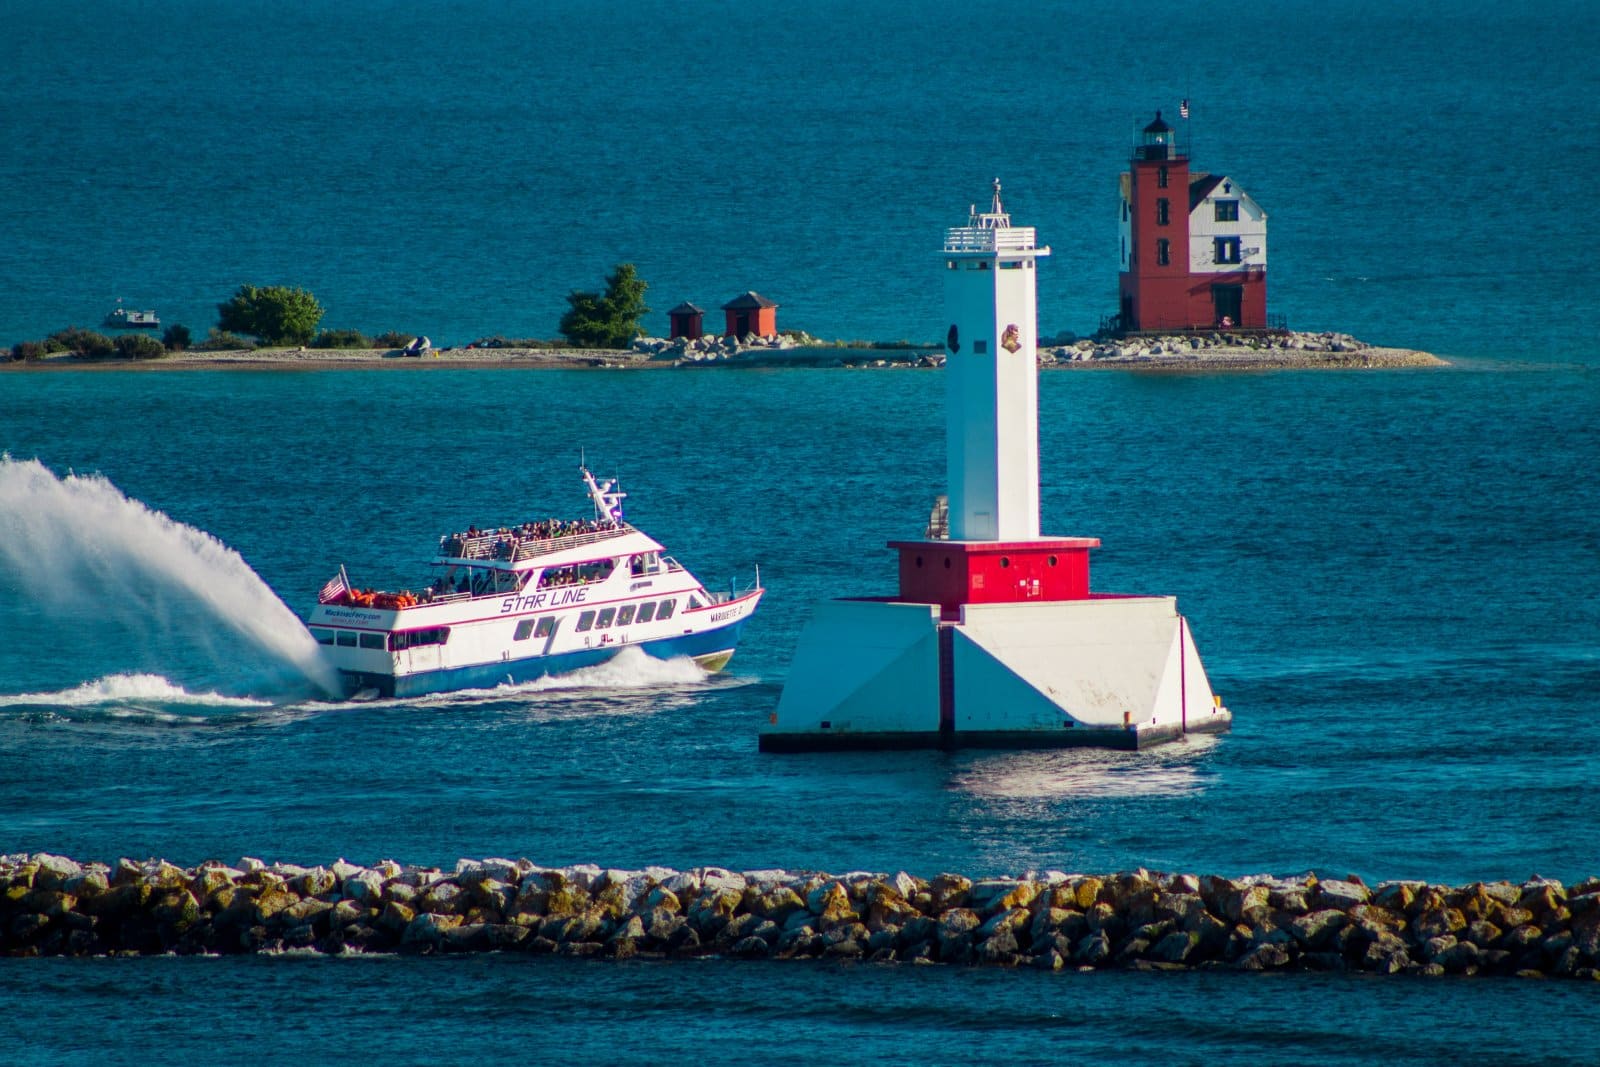 <p>Michigan’s natural and cultural attractions contribute to its $25 billion tourism revenue. Mackinac Island ferry tickets cost around $26 for an adult round trip.</p>